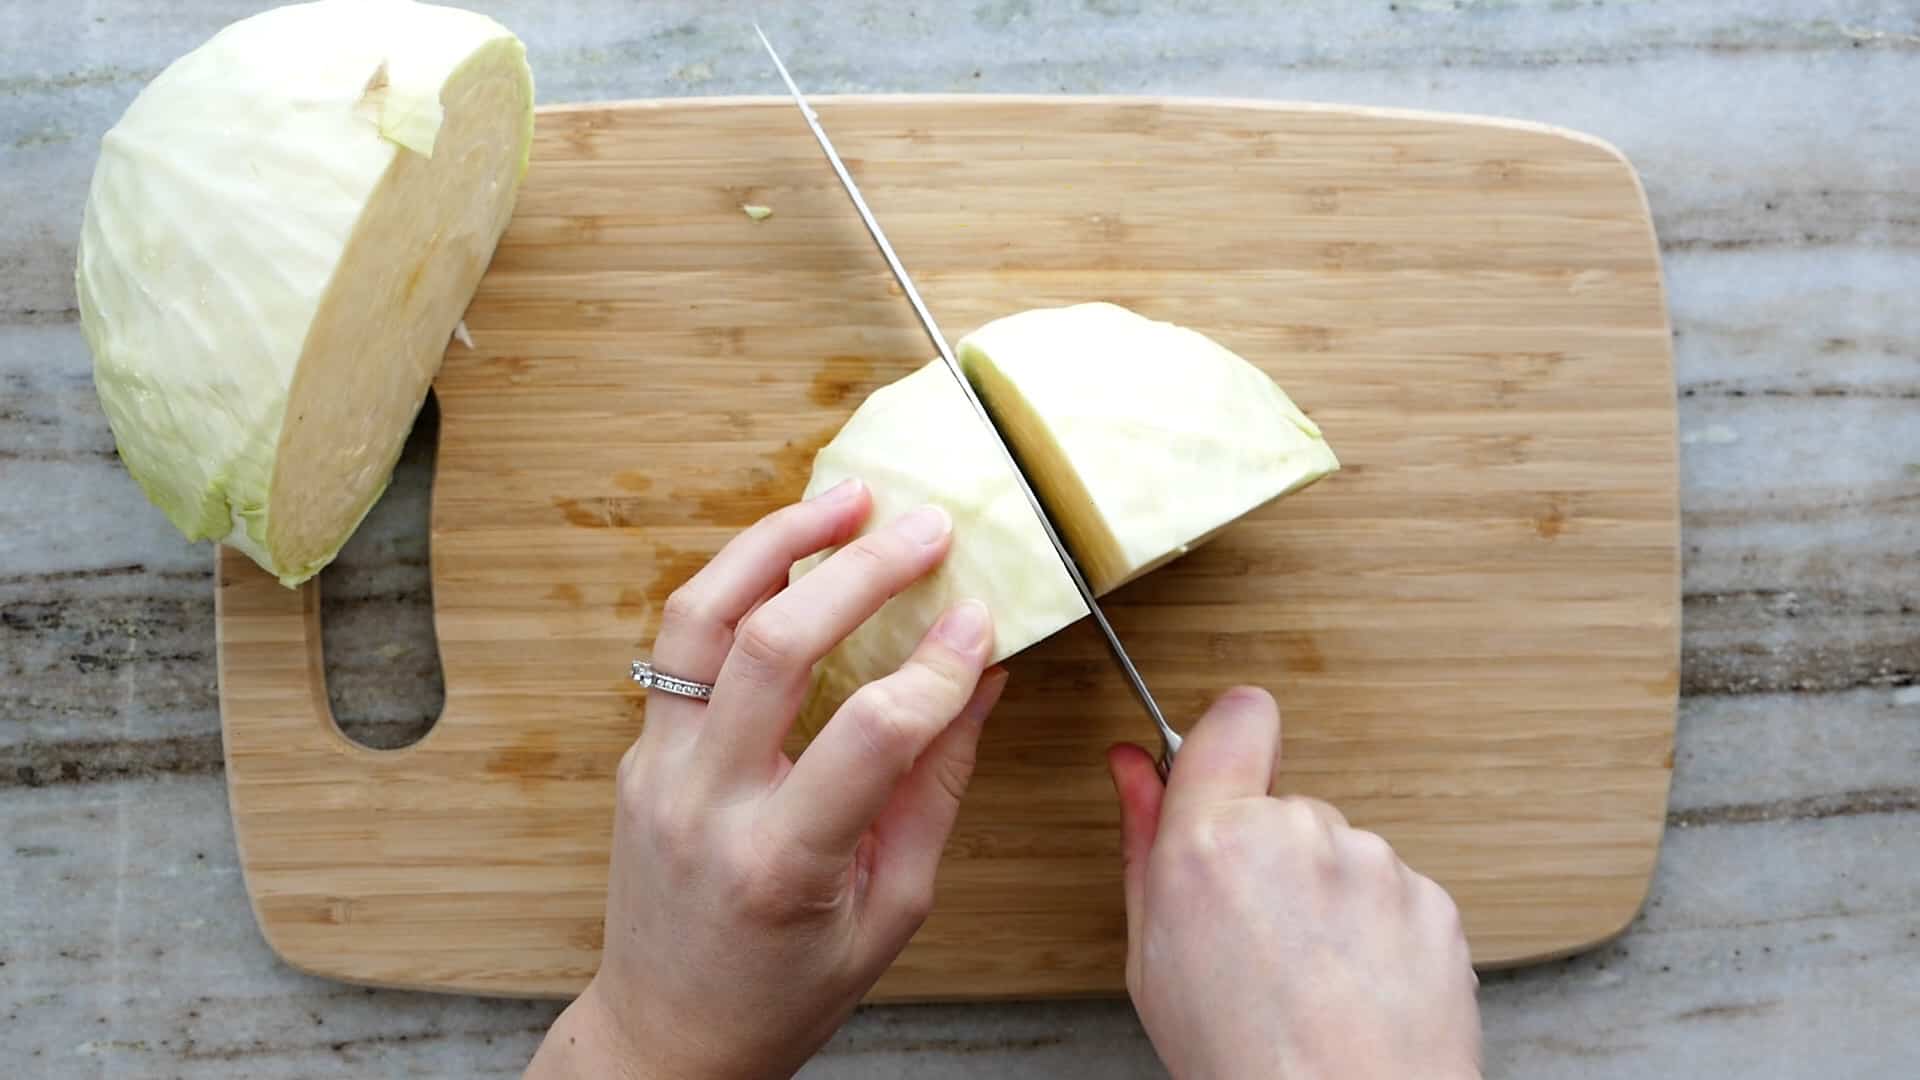 woman cutting a head of cabbage into quarters with a knife on a cutting board